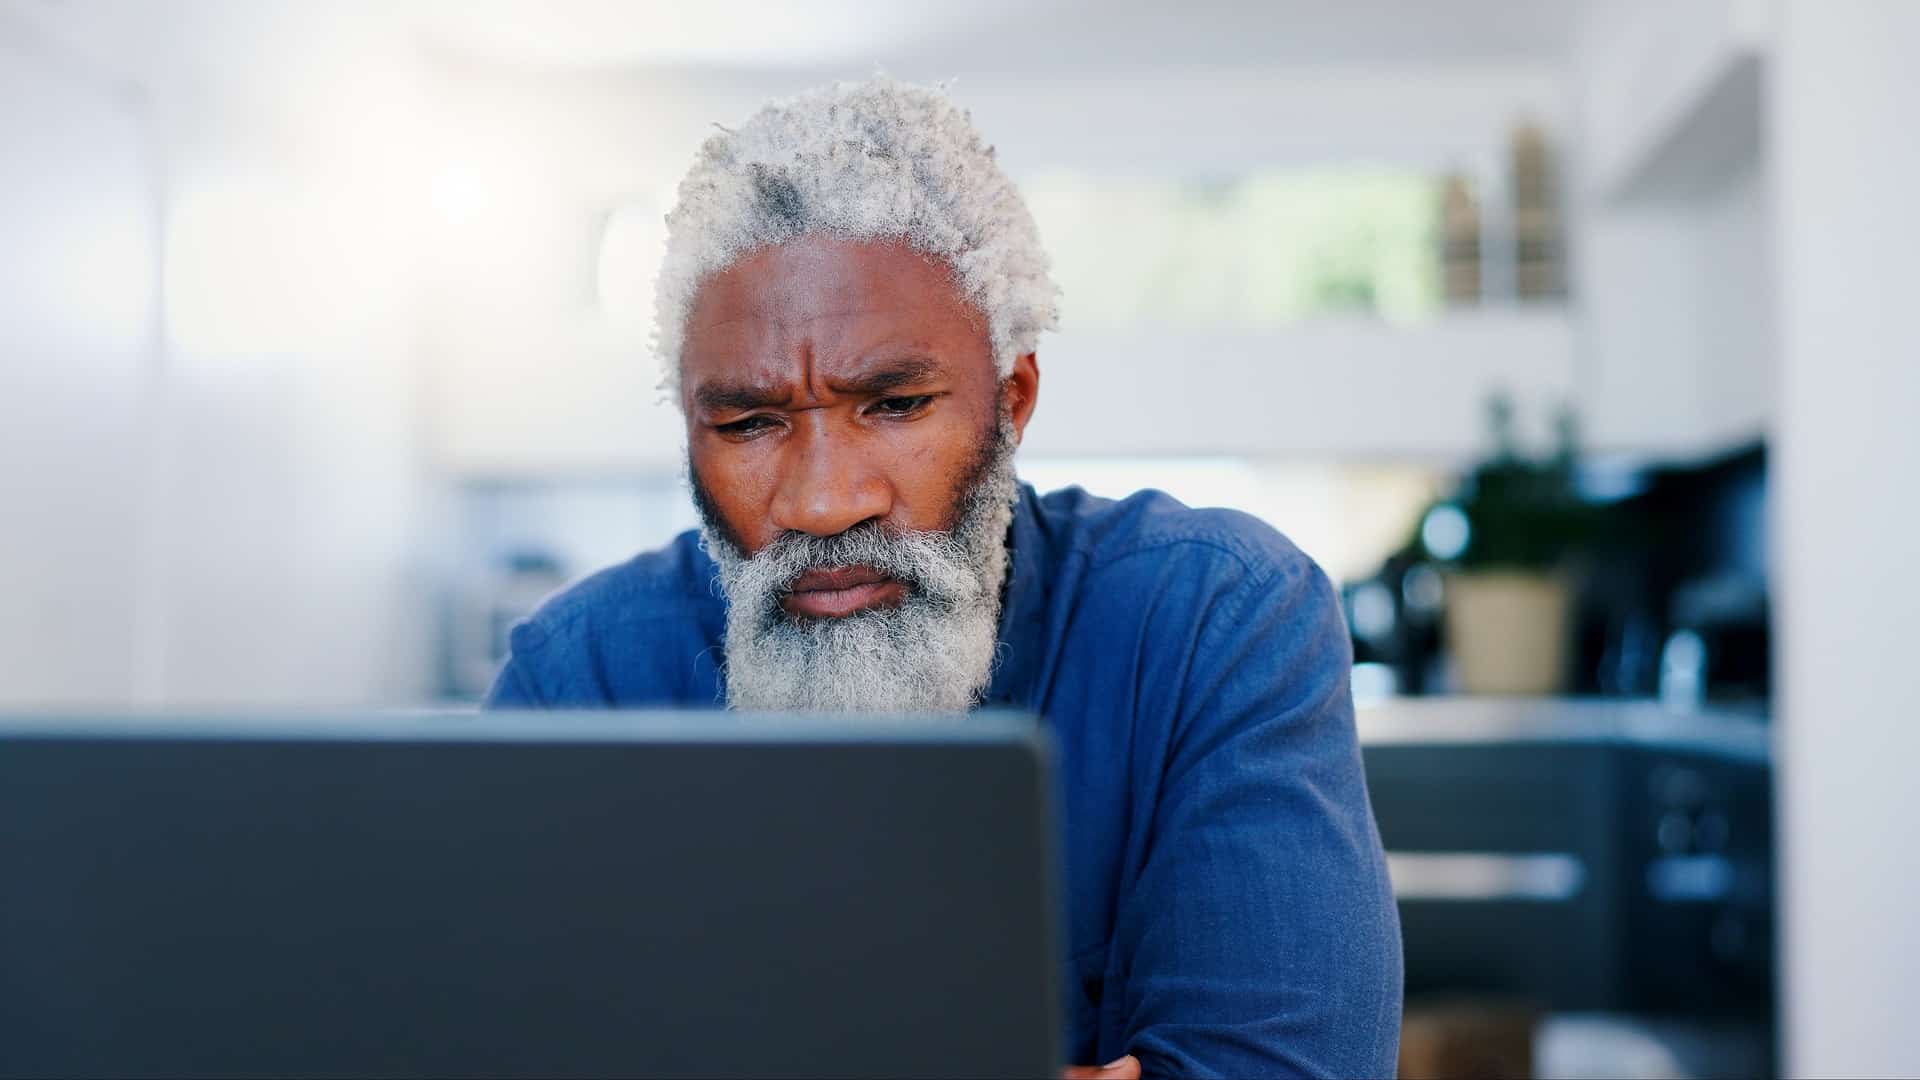 A man frowning while using a laptop in this image from Shutterstock.